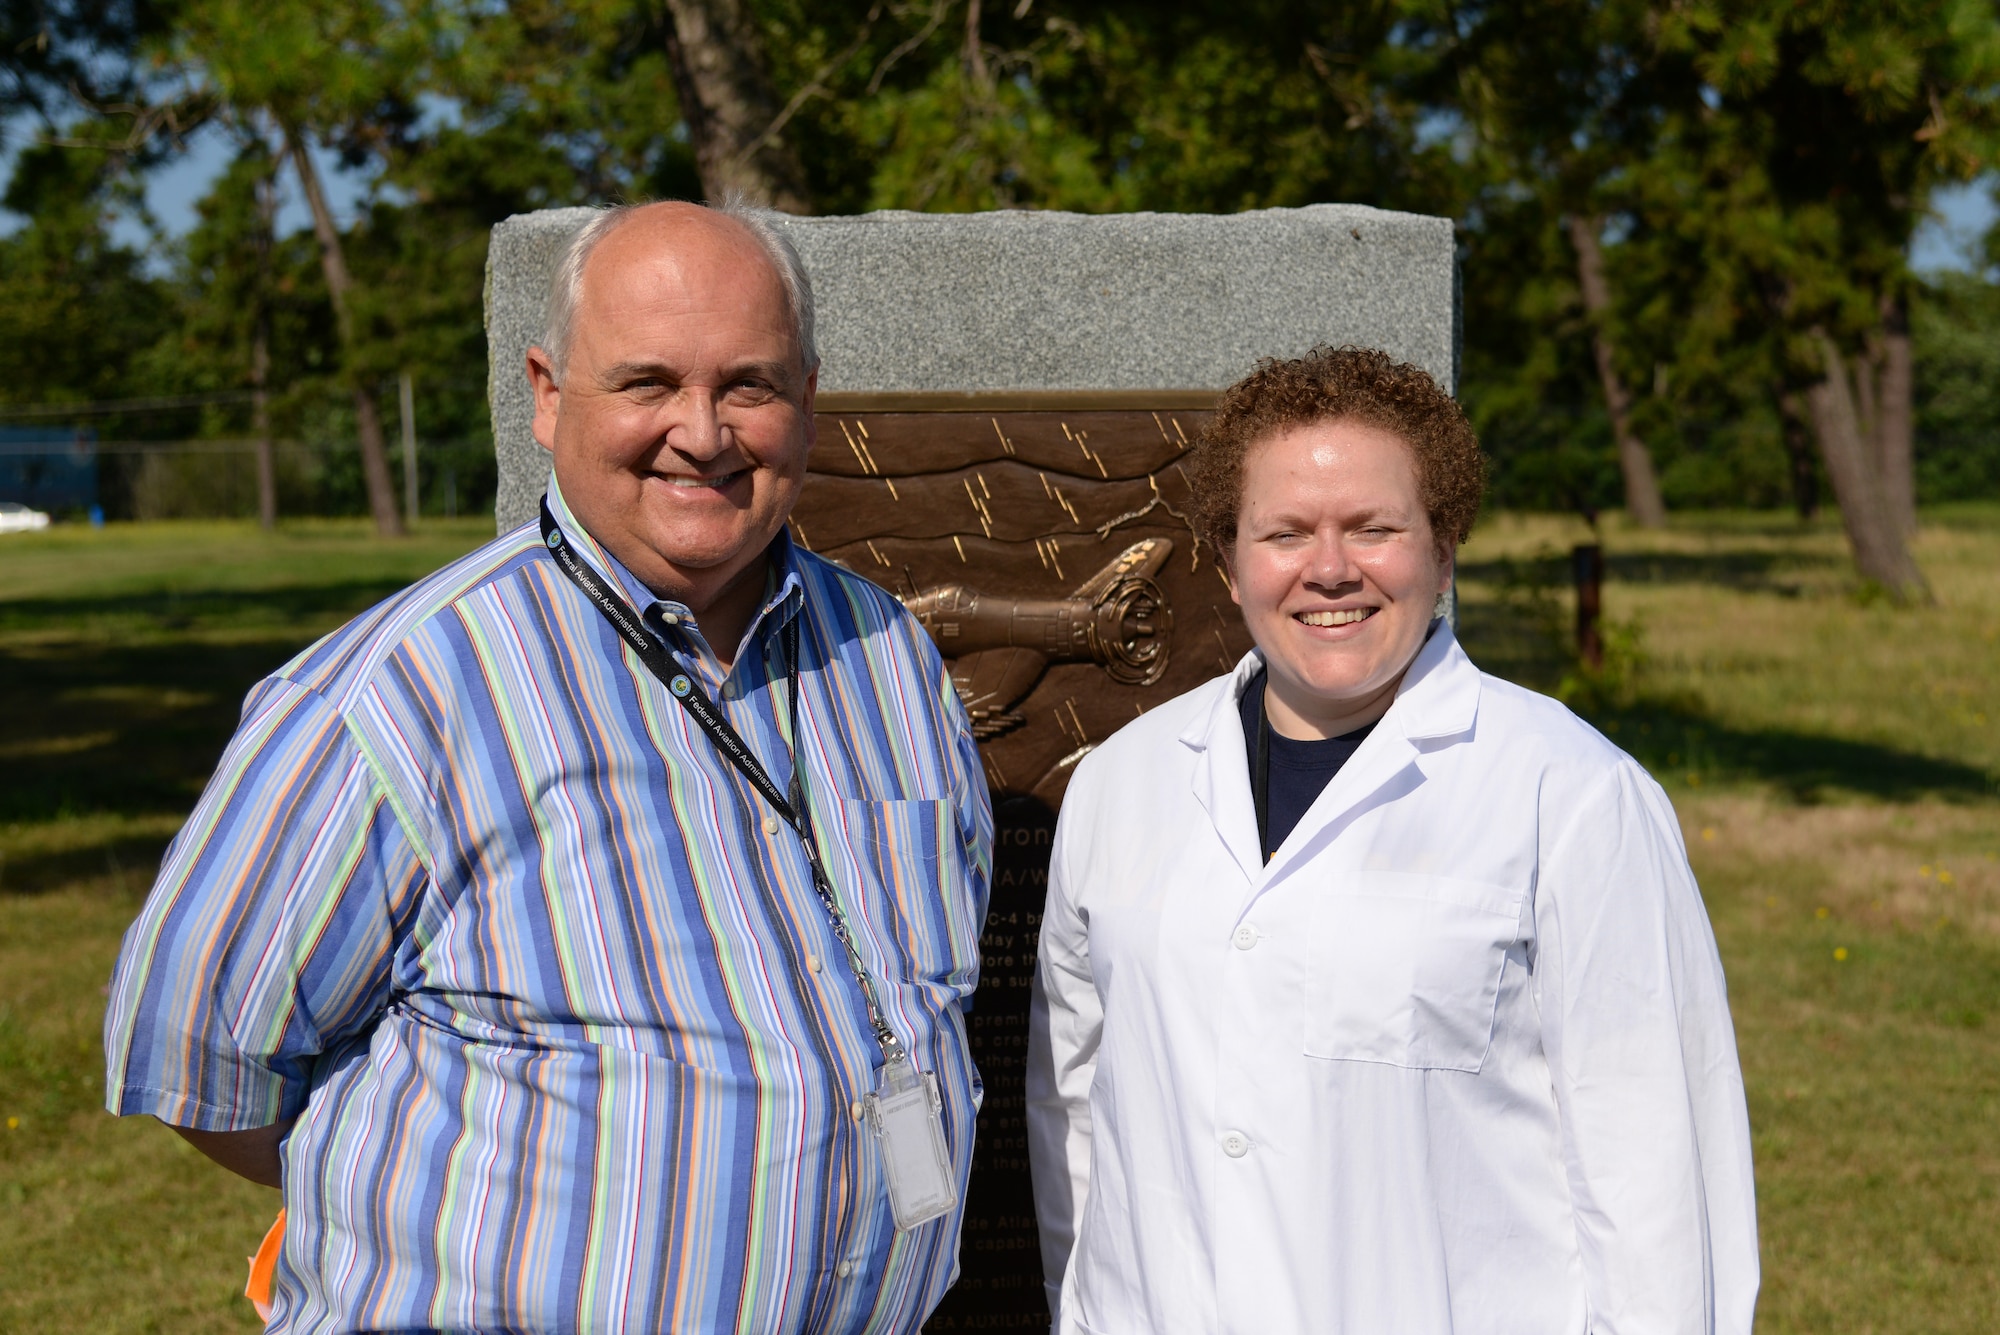 A picture of Stan Ciurczak, Management and Program Analyst with the FAA William J. Hughes Technical Center, and Melissa Swanson, Naval History and Heritage Command Conservator, posing for a photo in front of a U.S. Navy VC-4 memorial marker.